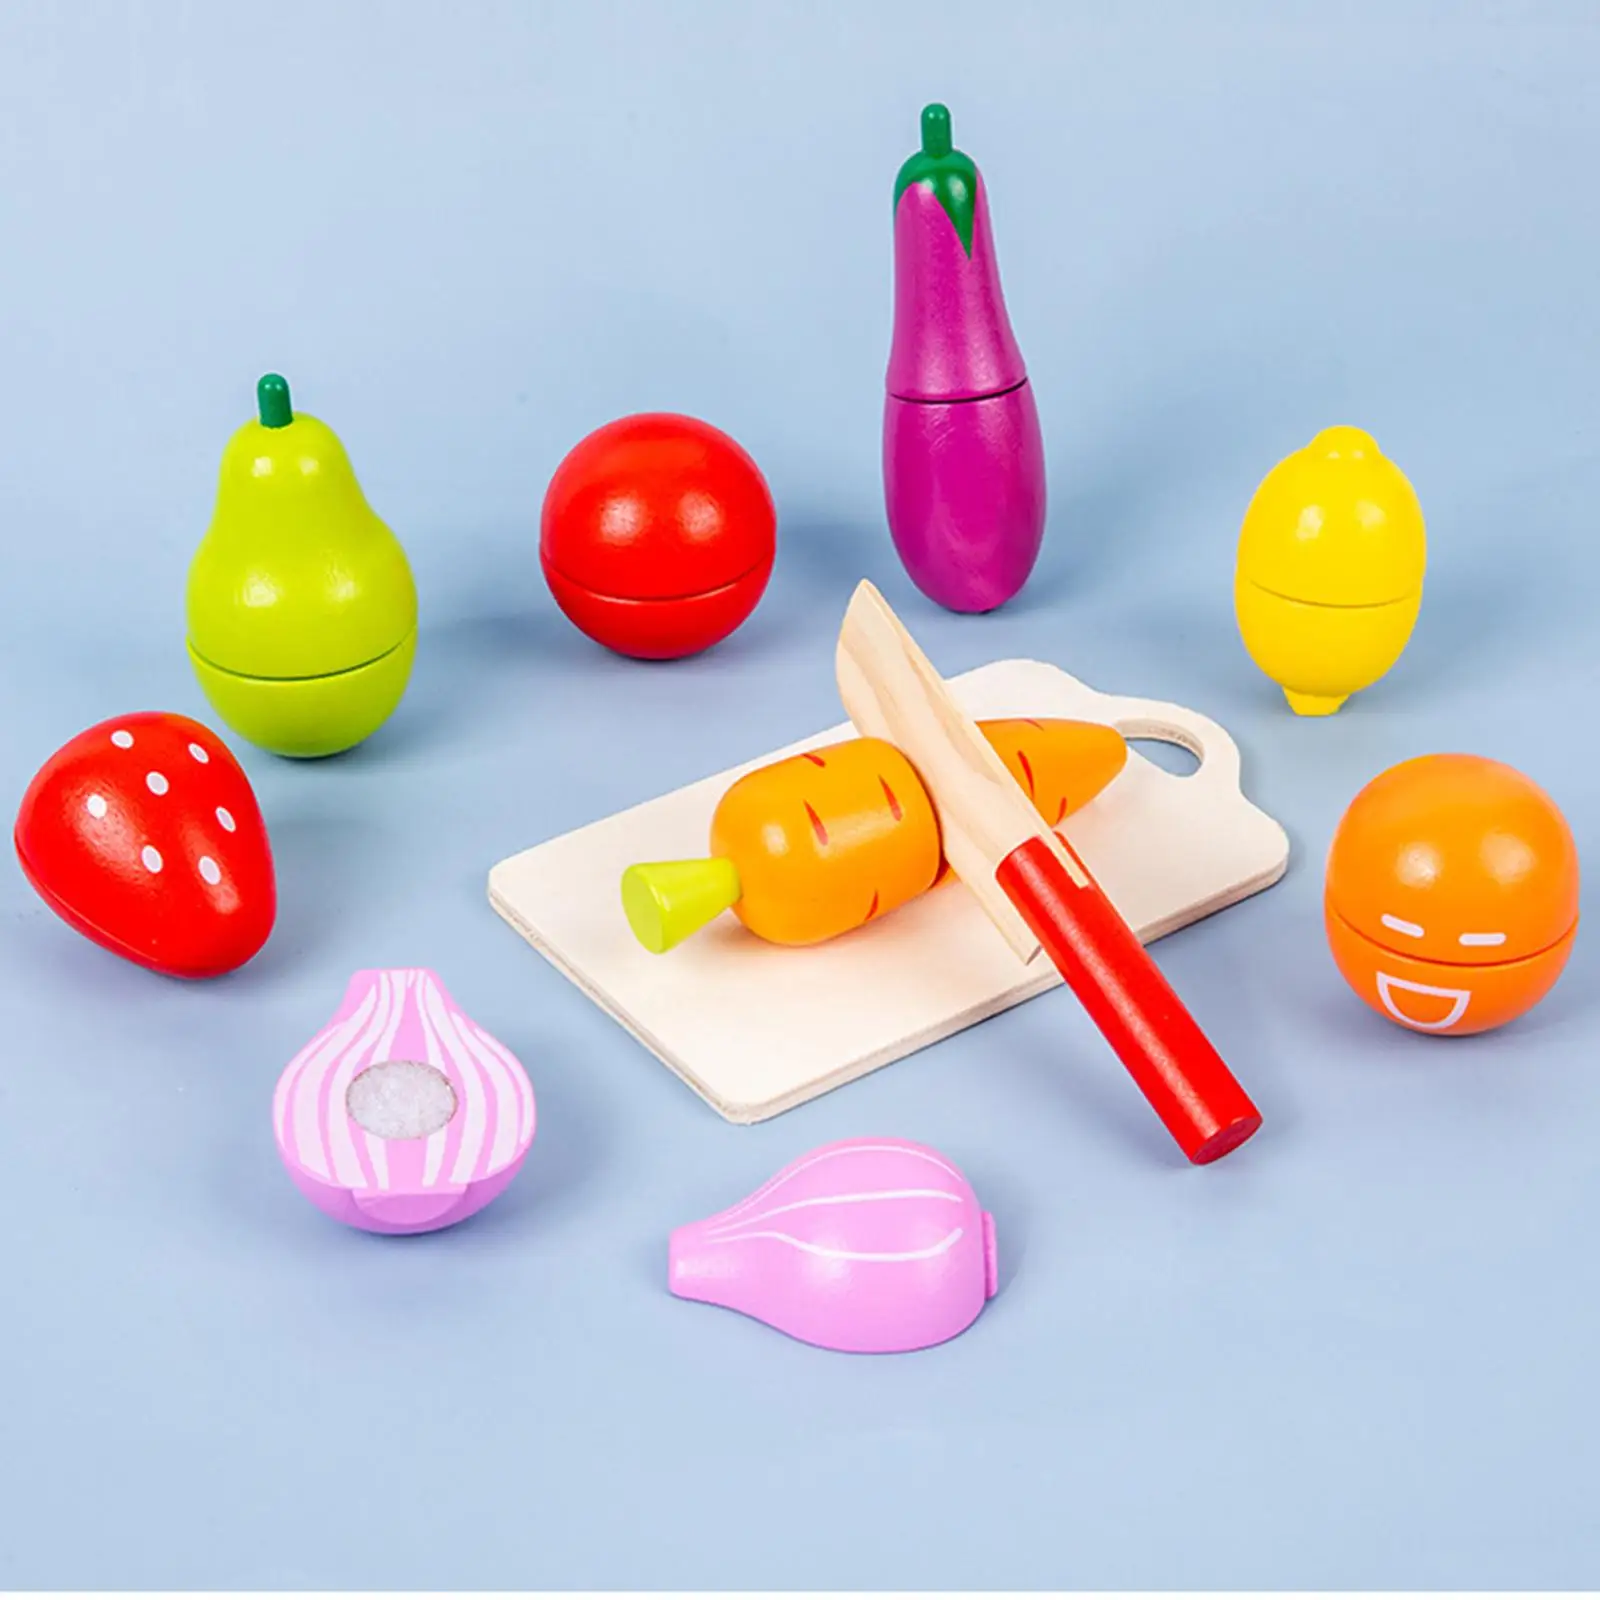 Simulation Food Toys Early Educational Toys Role Play for Toddlers Gifts